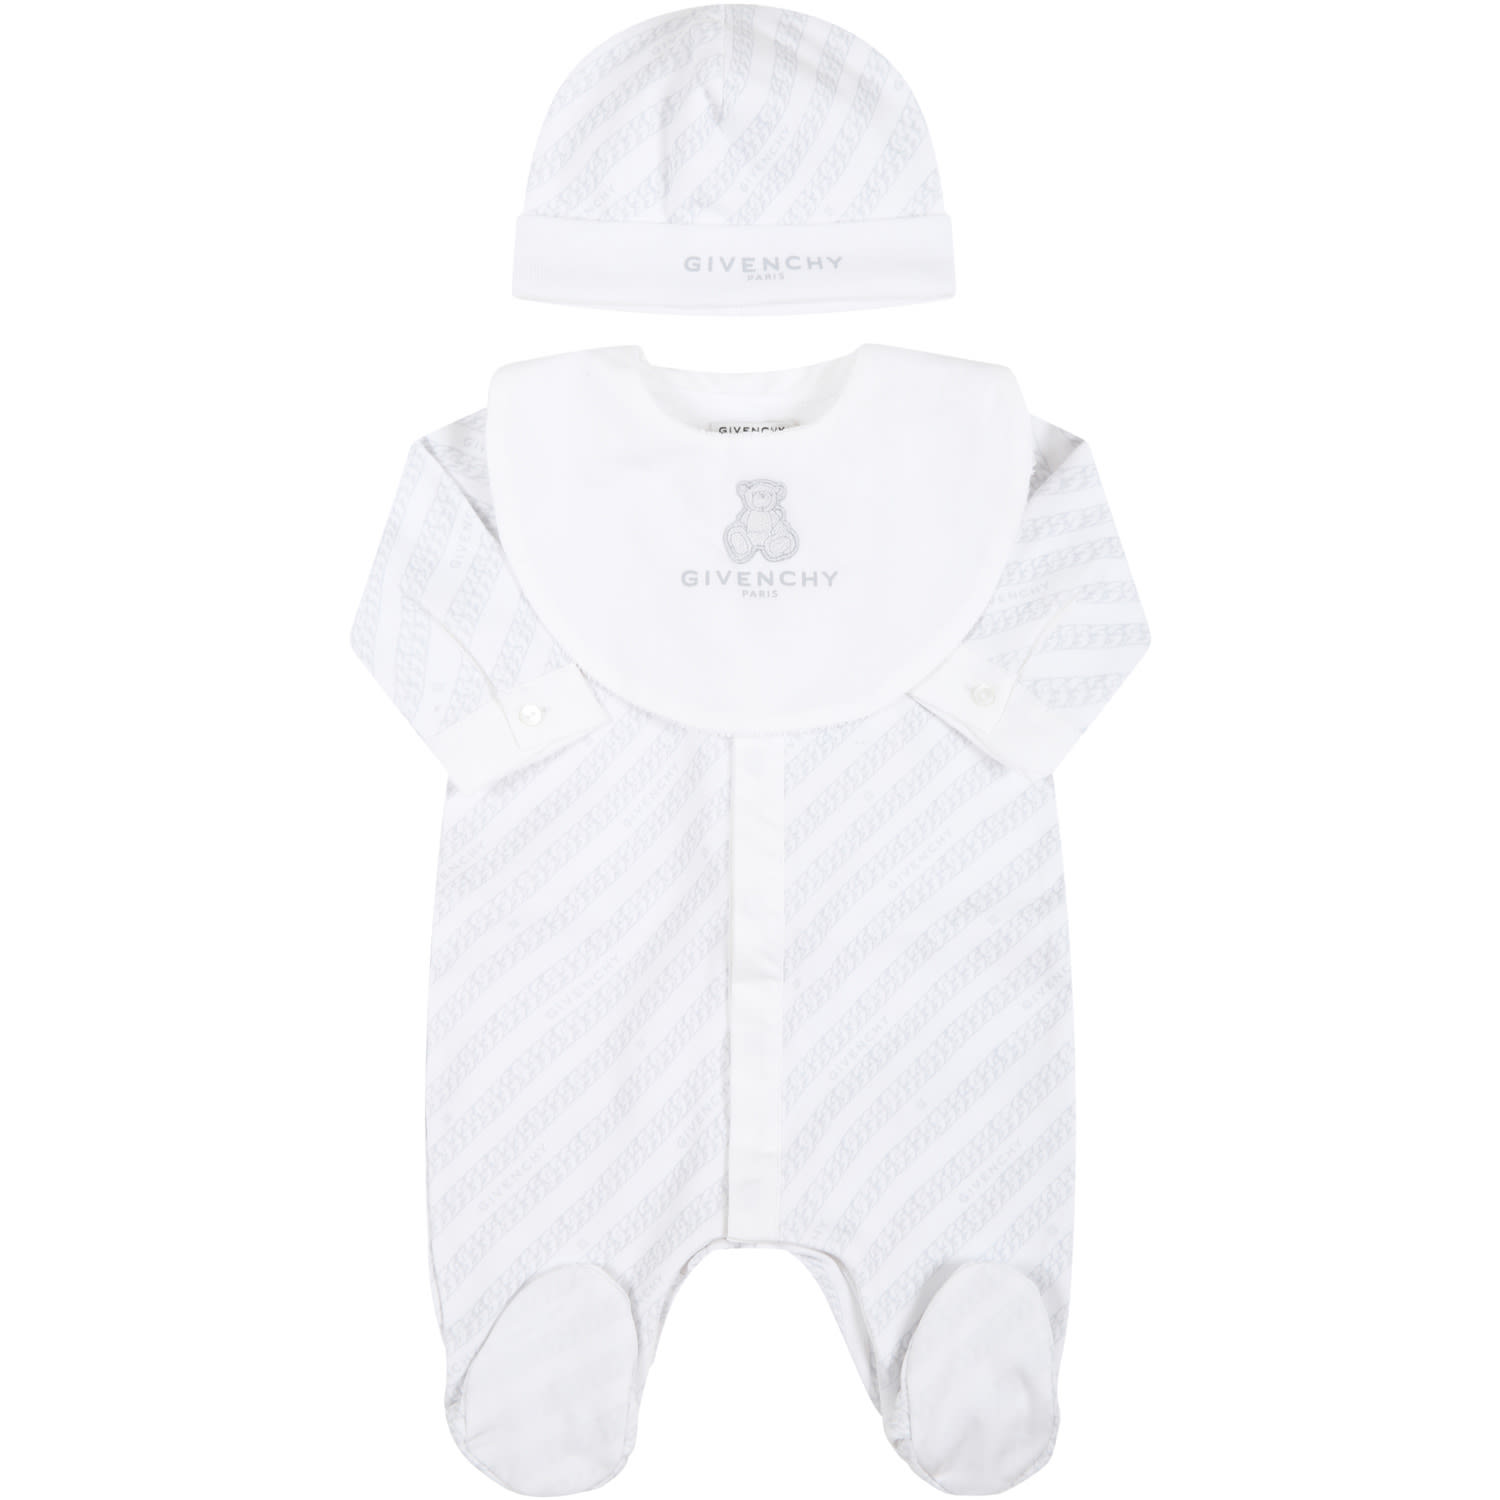 Givenchy White Set For Baby Kids With Logos In Grey